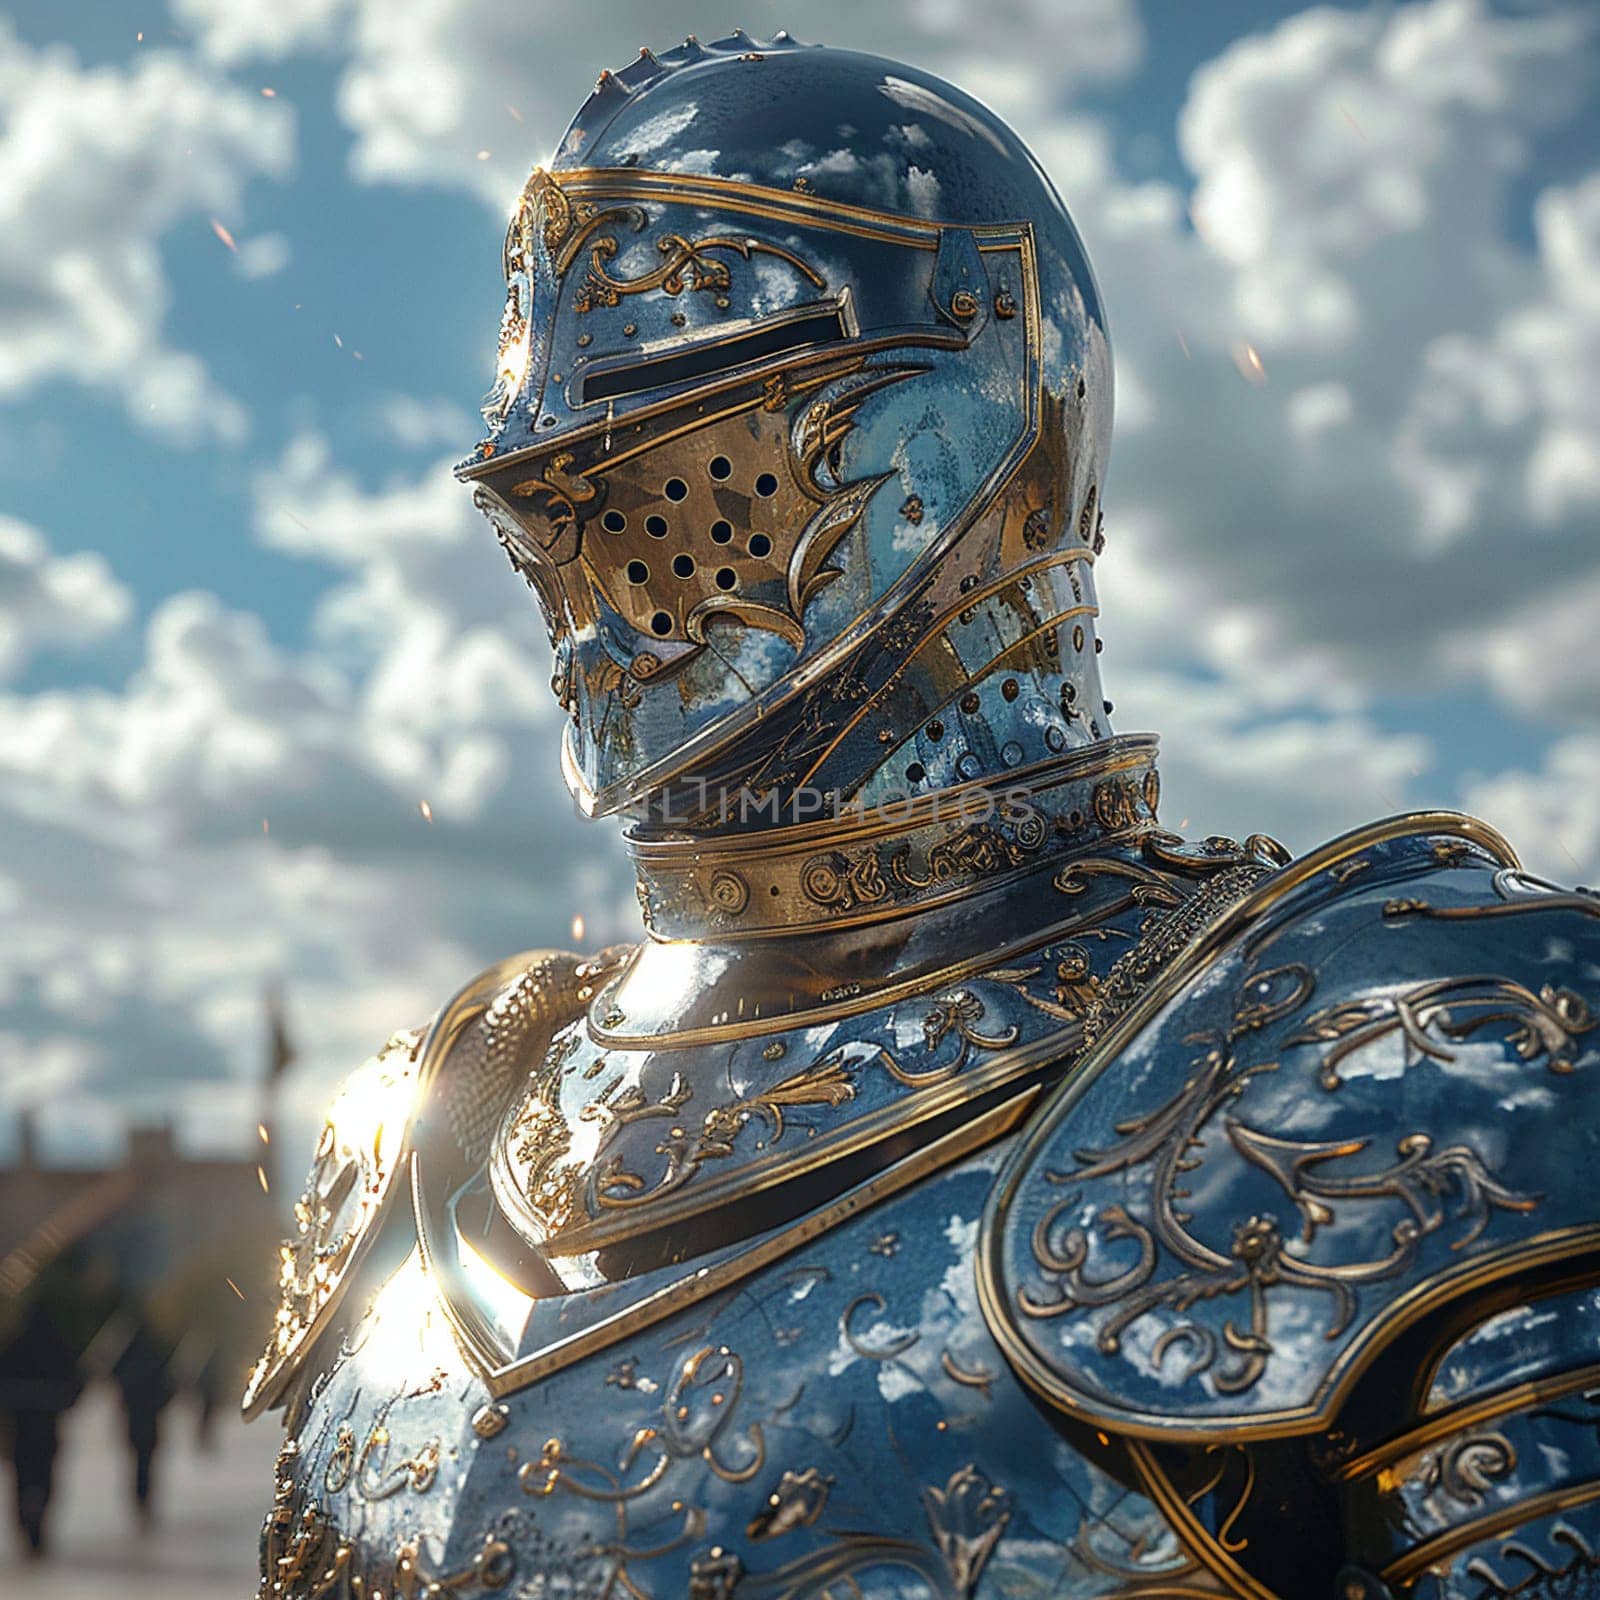 A knight's shining armor detailed in a 3D render, reflecting a tumultuous sky and a looming battle.